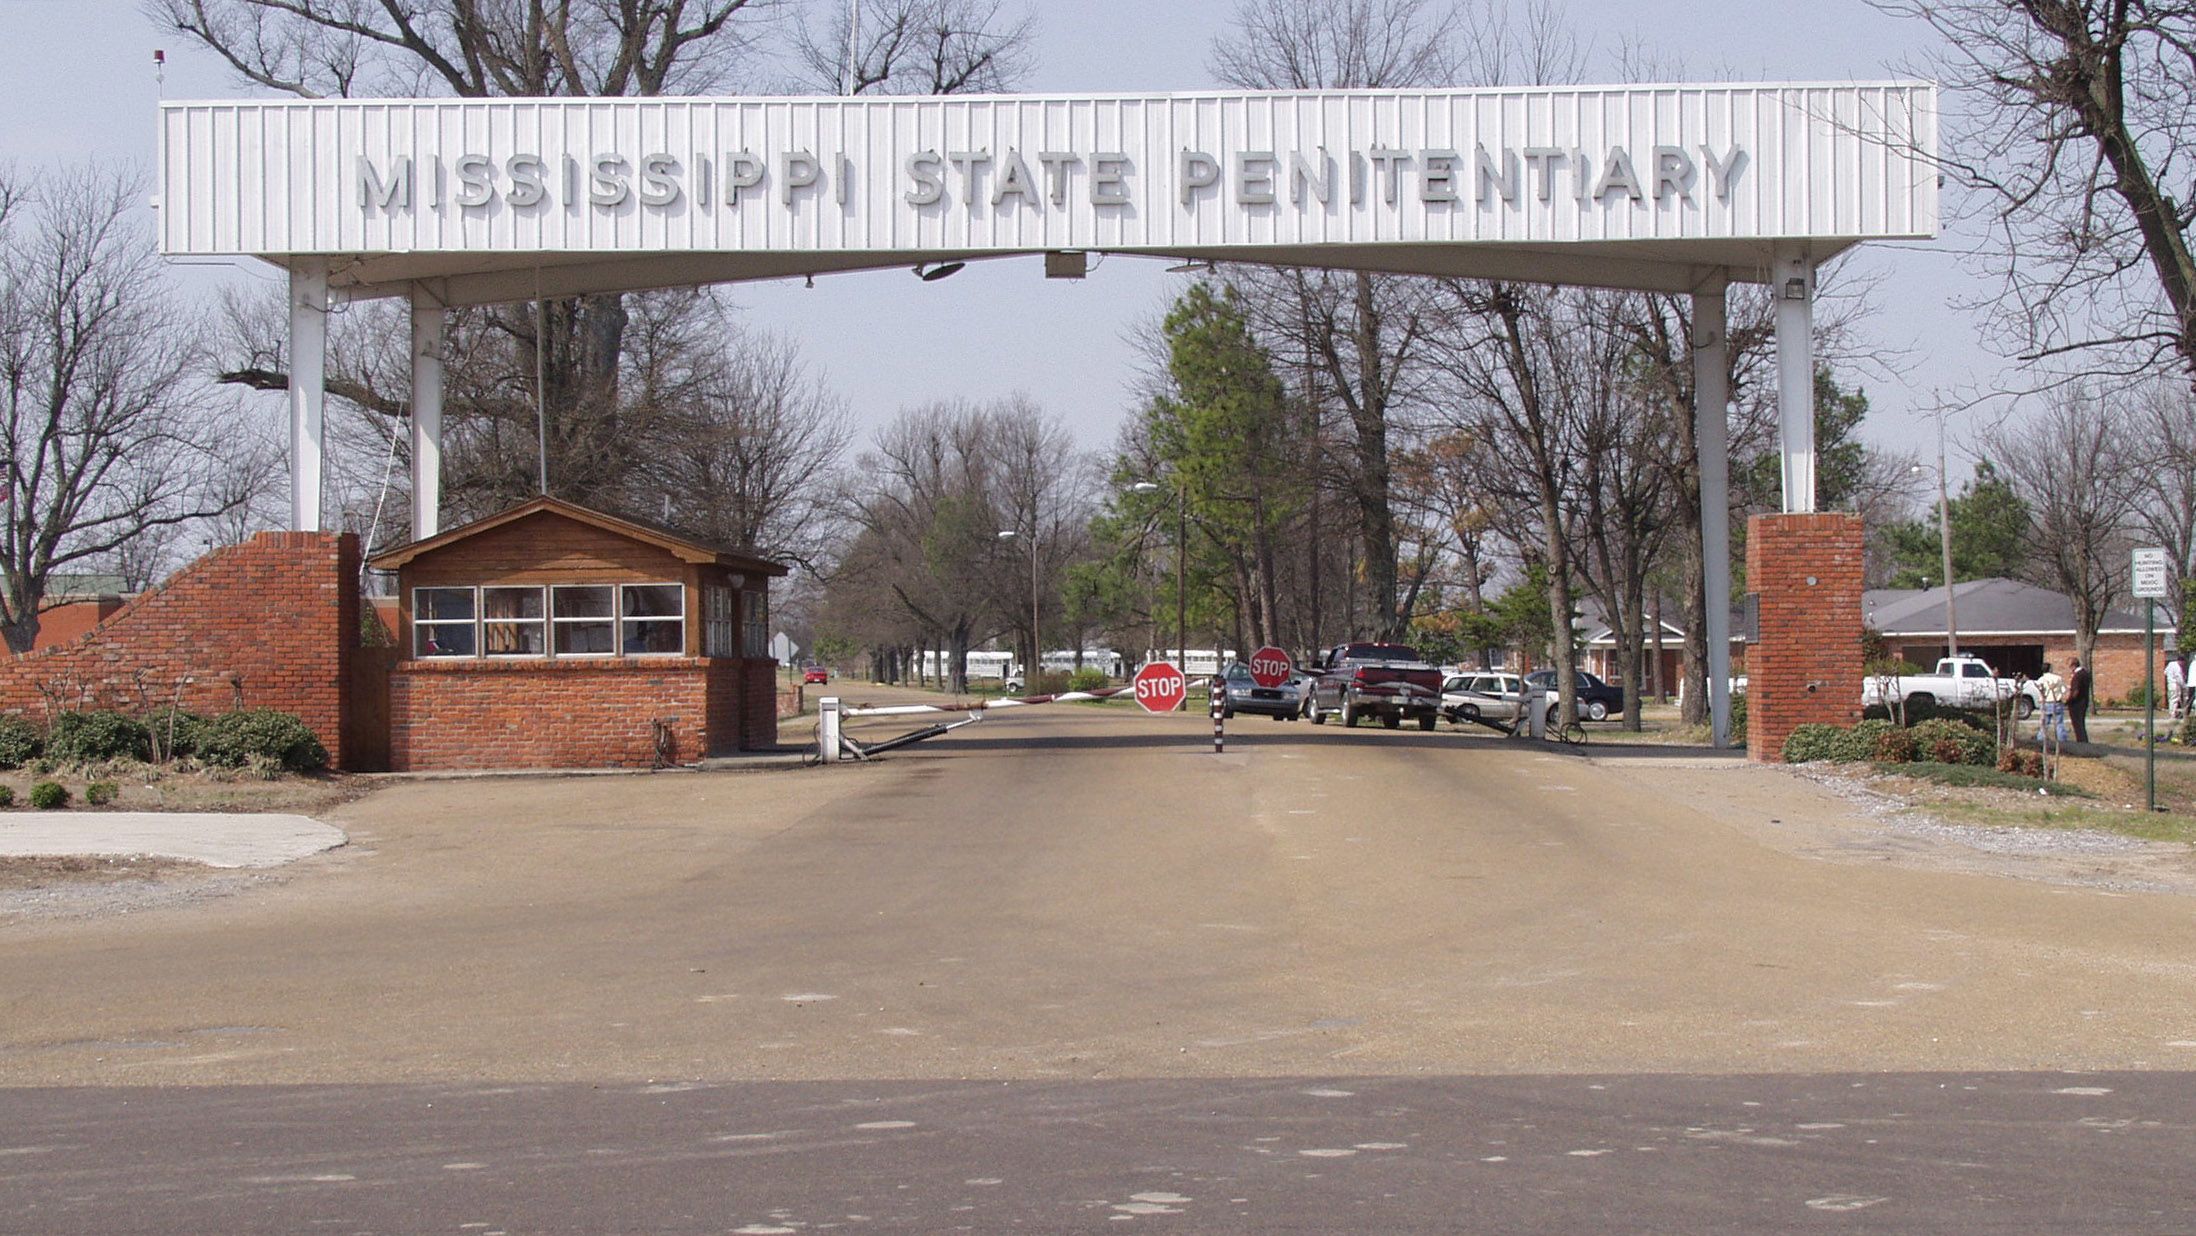 Gov. Tate Reeves said he is shutting down Unit 29 within the Mississippi State Penitentiary at Parchman